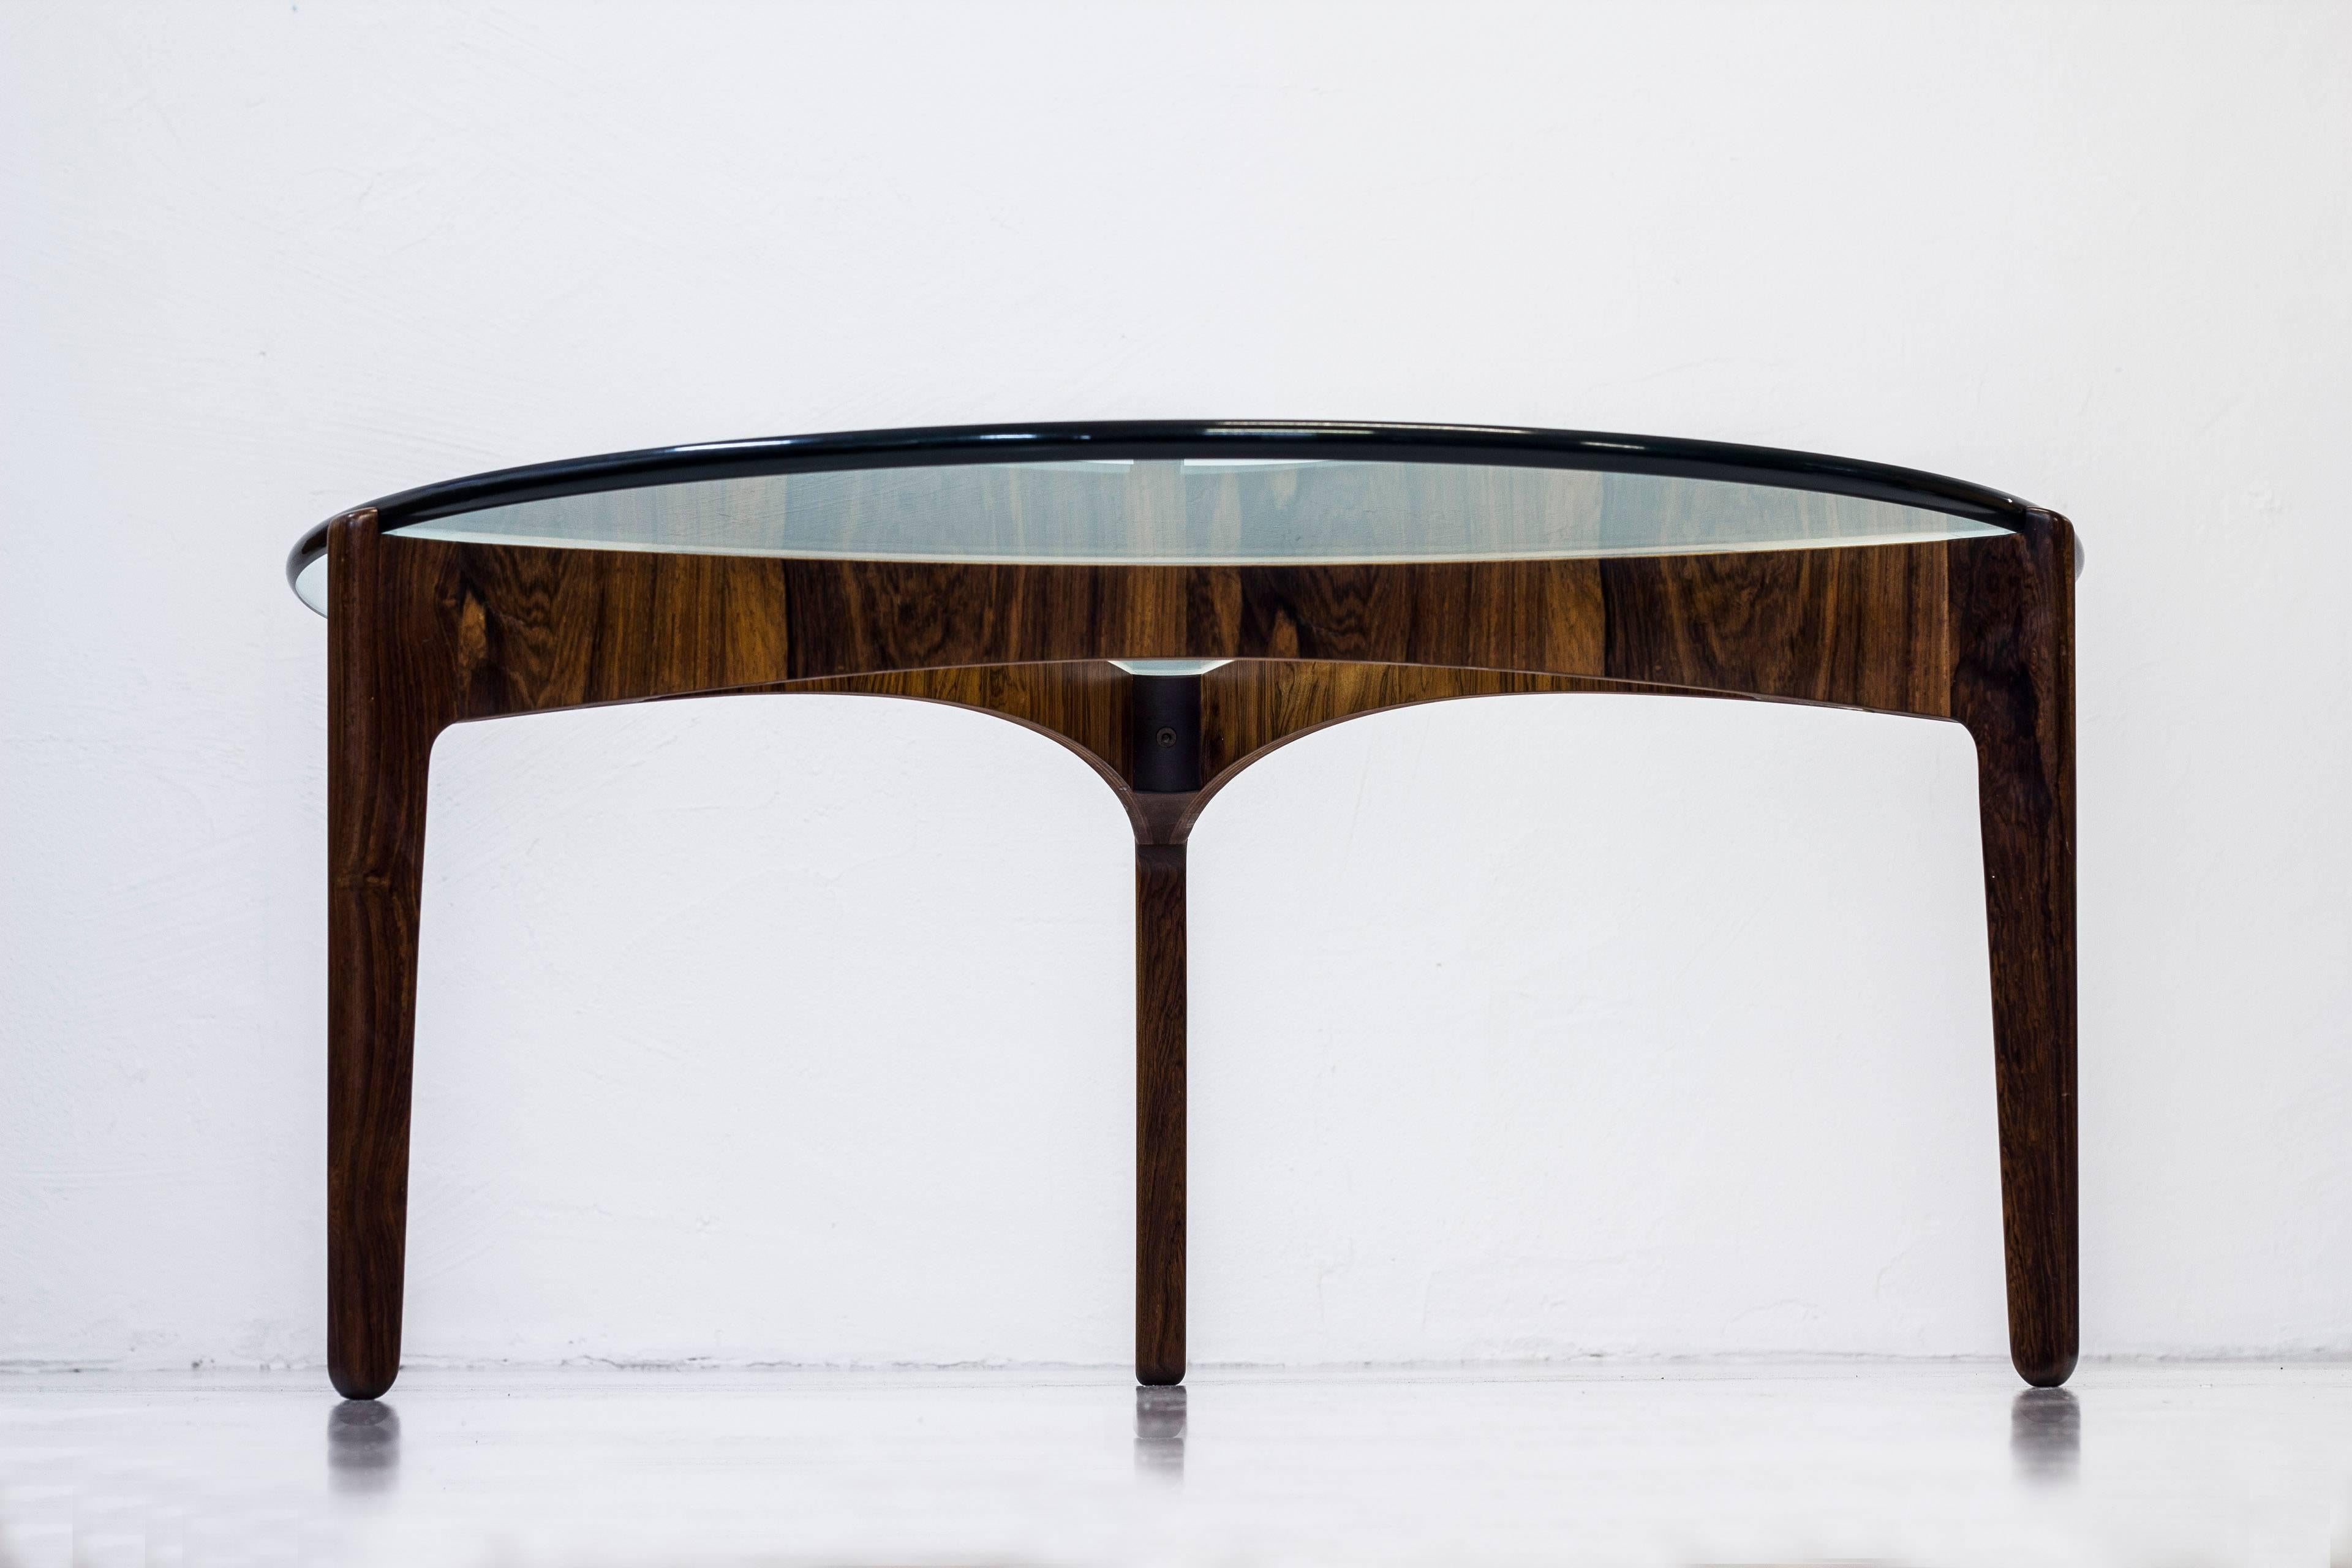 Sofa table designed by Svend Ellekaer. Produced in Denmark by Christian Linneberg furniture factory during the 1960s. Made from solid and bentwood palisander. Original, thick clear glass table top. Excellent condition with very few signs of wear and